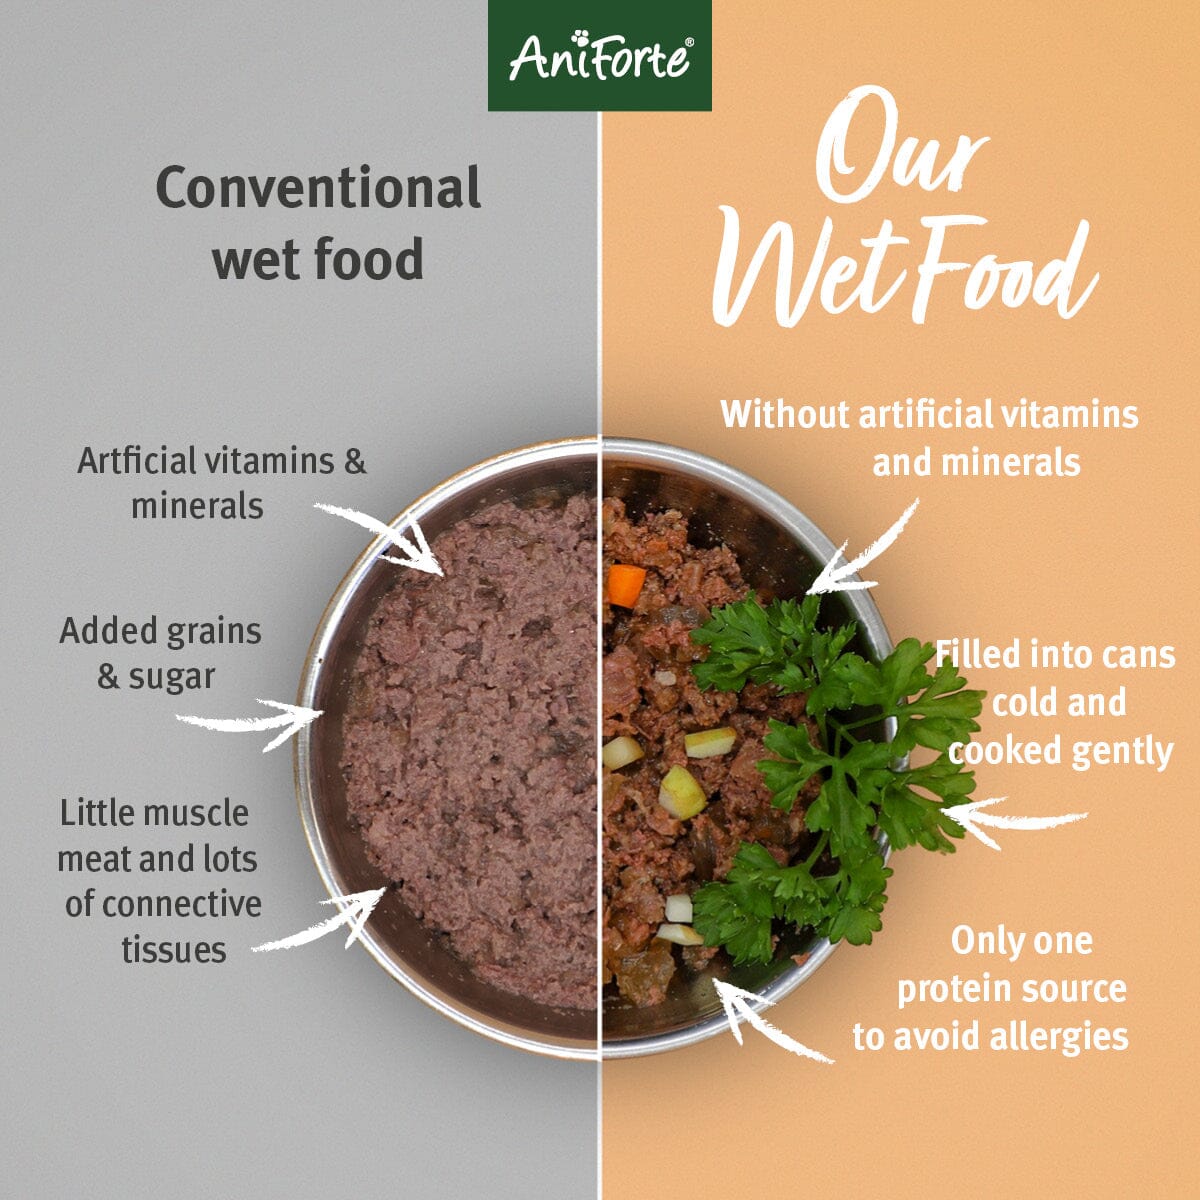 PureNature Country Beef - Wet Food for Dogs - AniForte UK